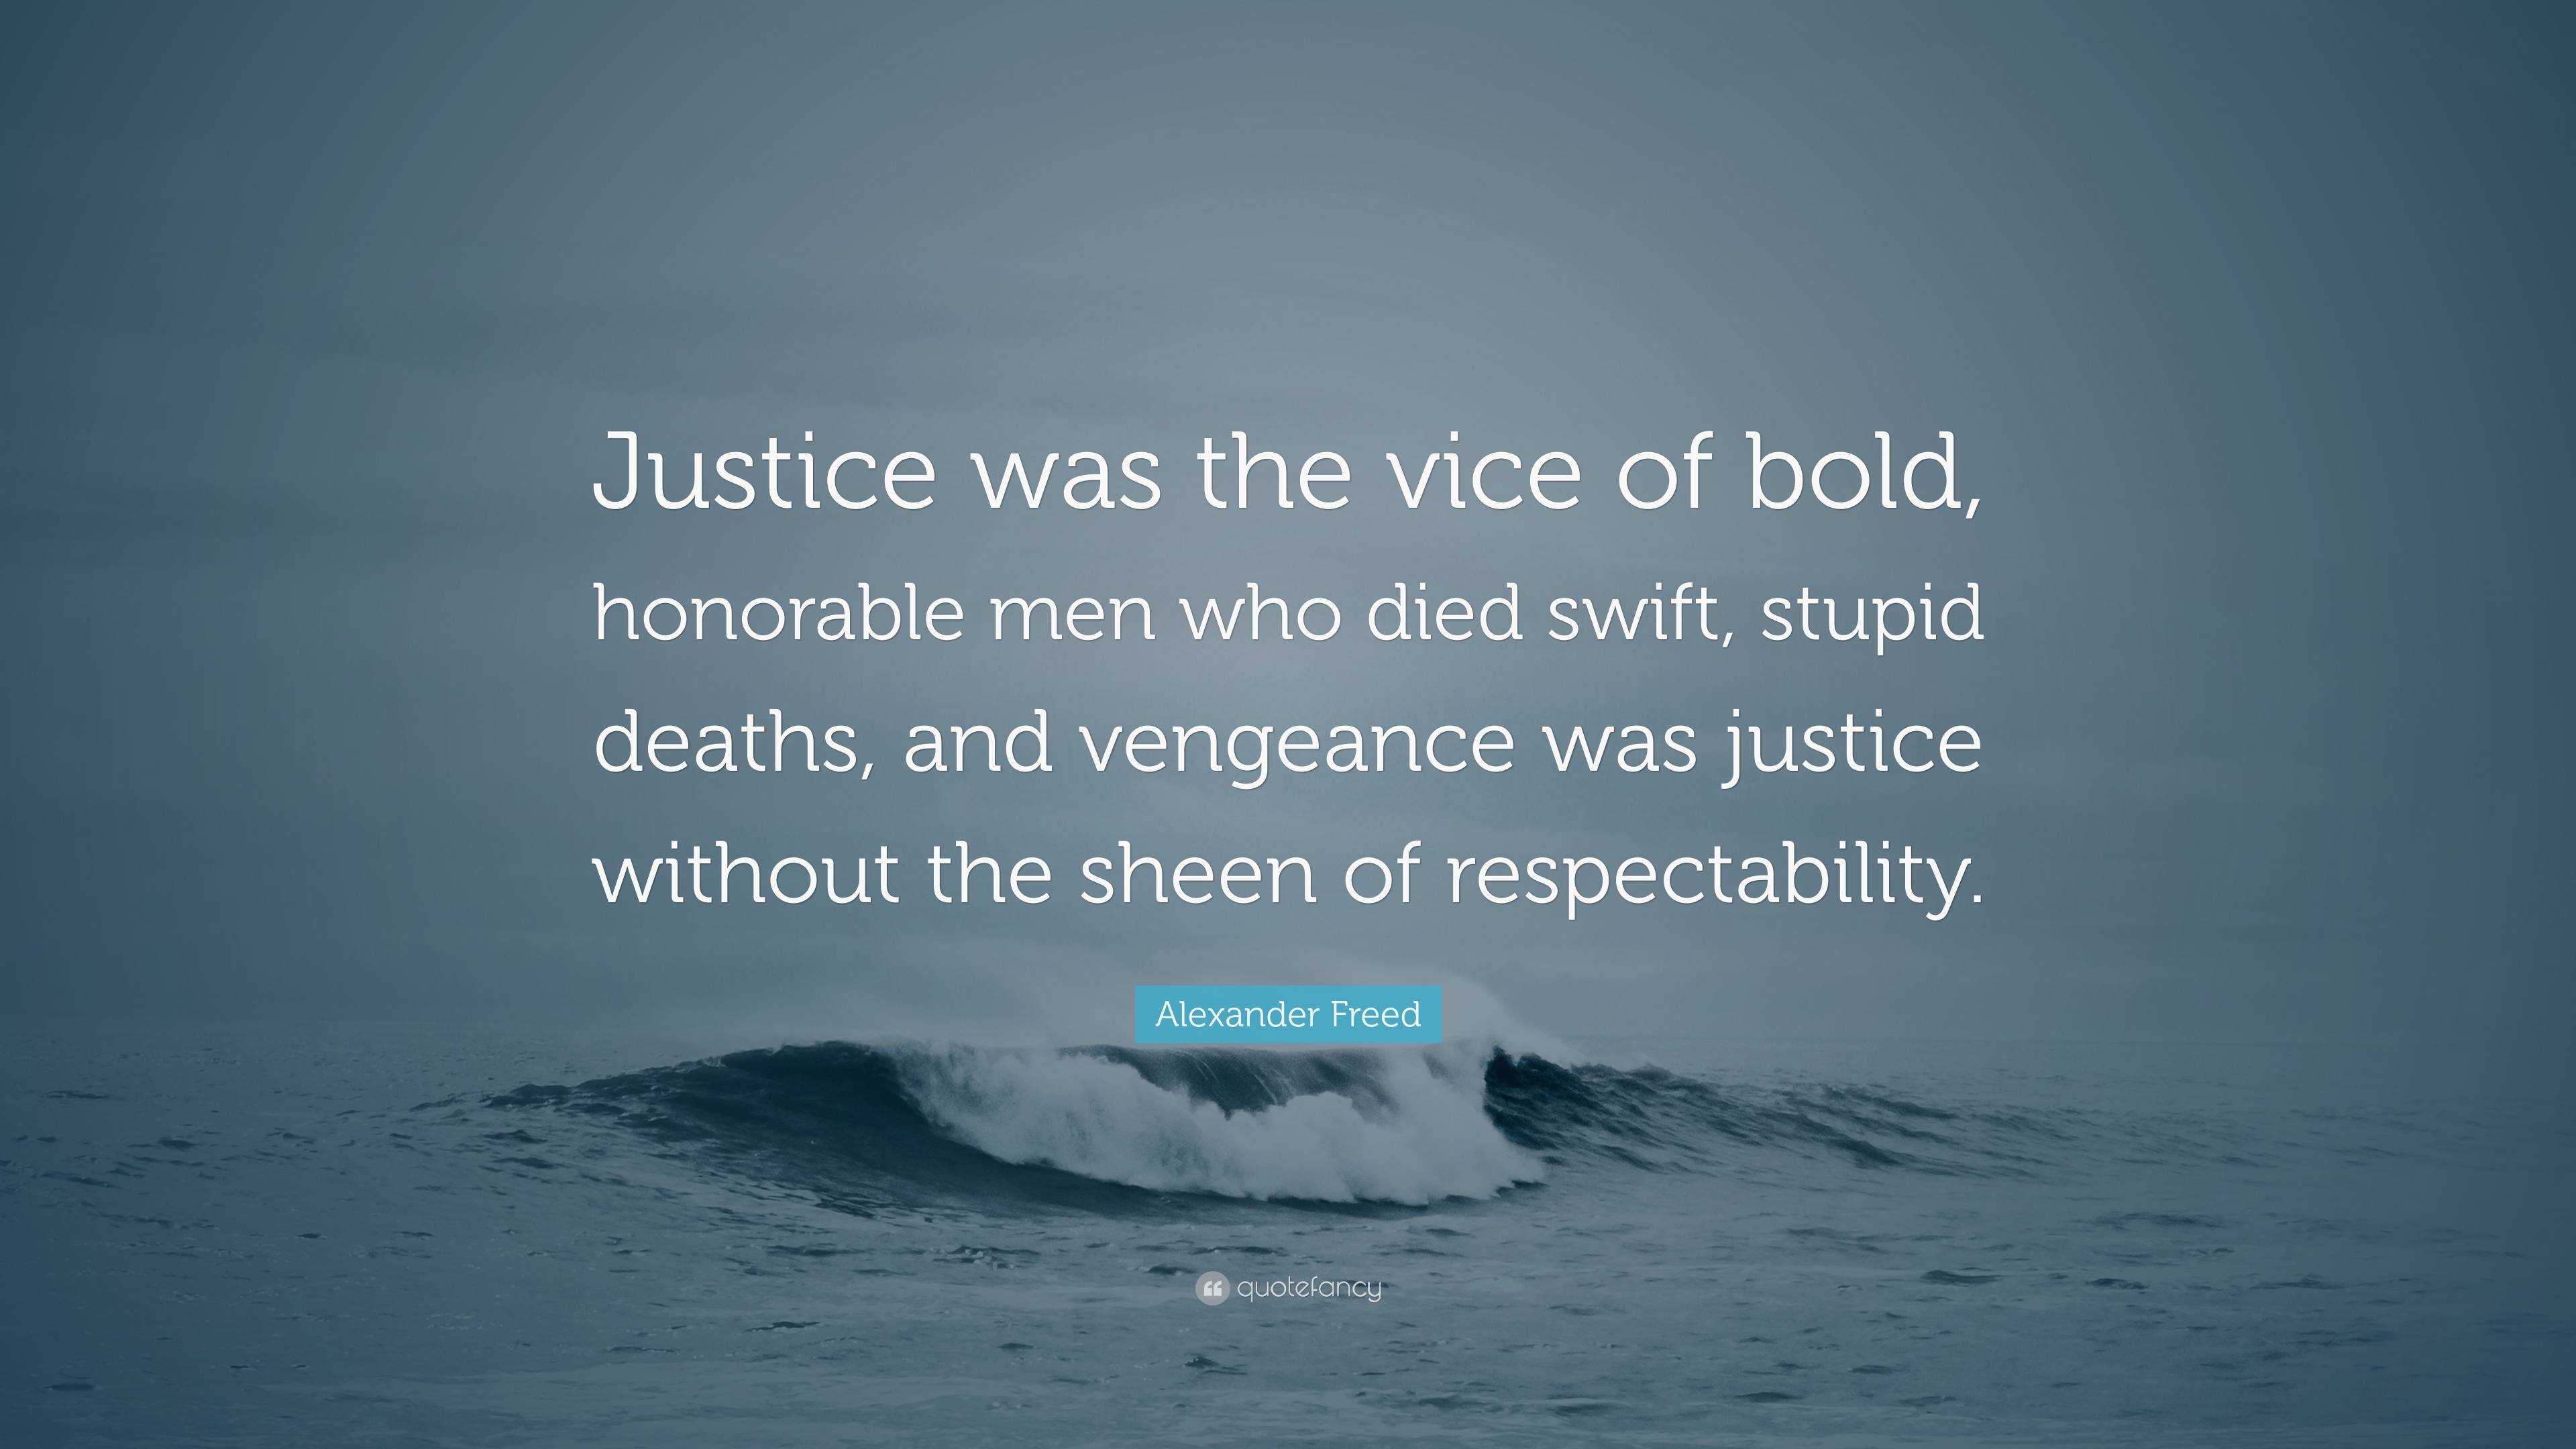 Alexander Freed Quote: “Justice was the vice of bold, honorable men who  died swift, stupid deaths, and vengeance was justice without the sheen o”